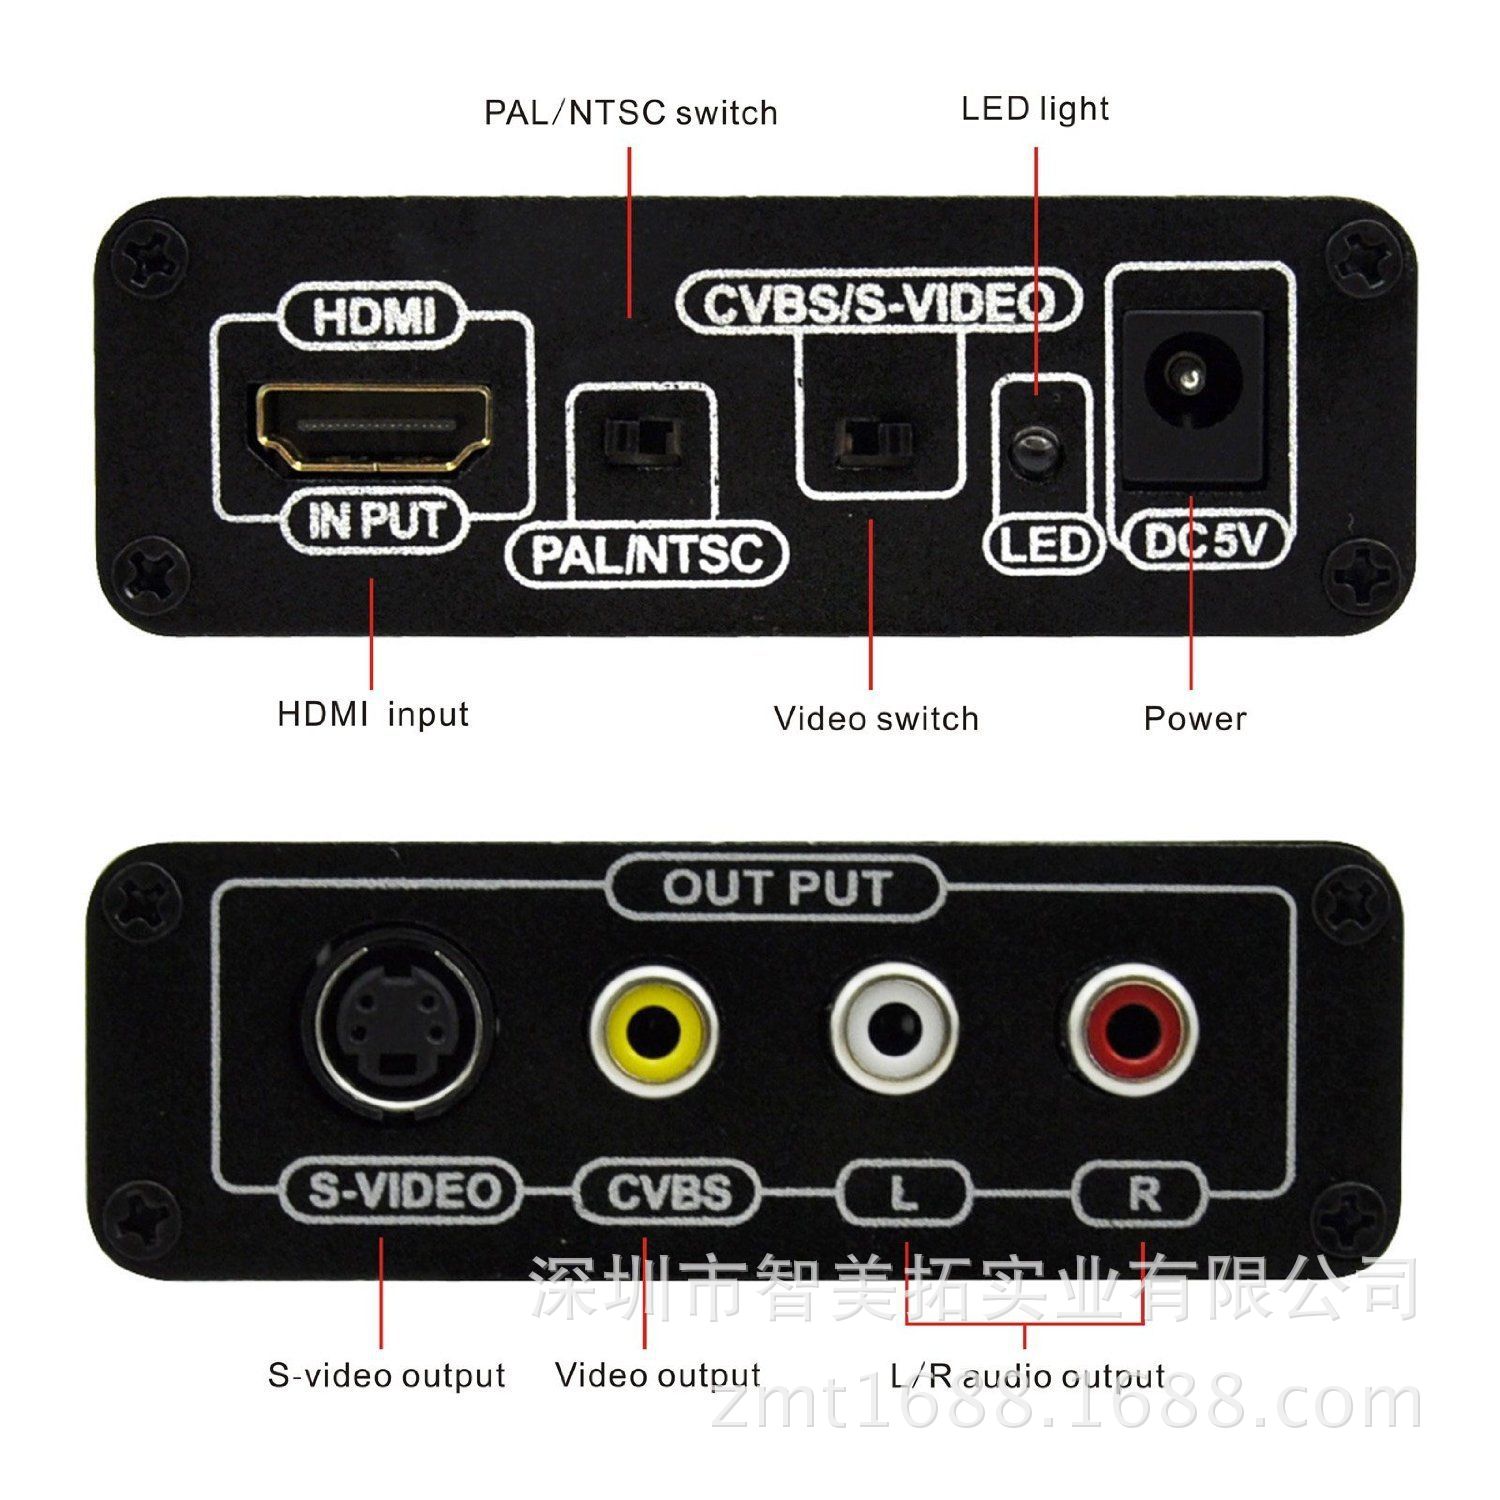 ps3 blu ray remote instructions